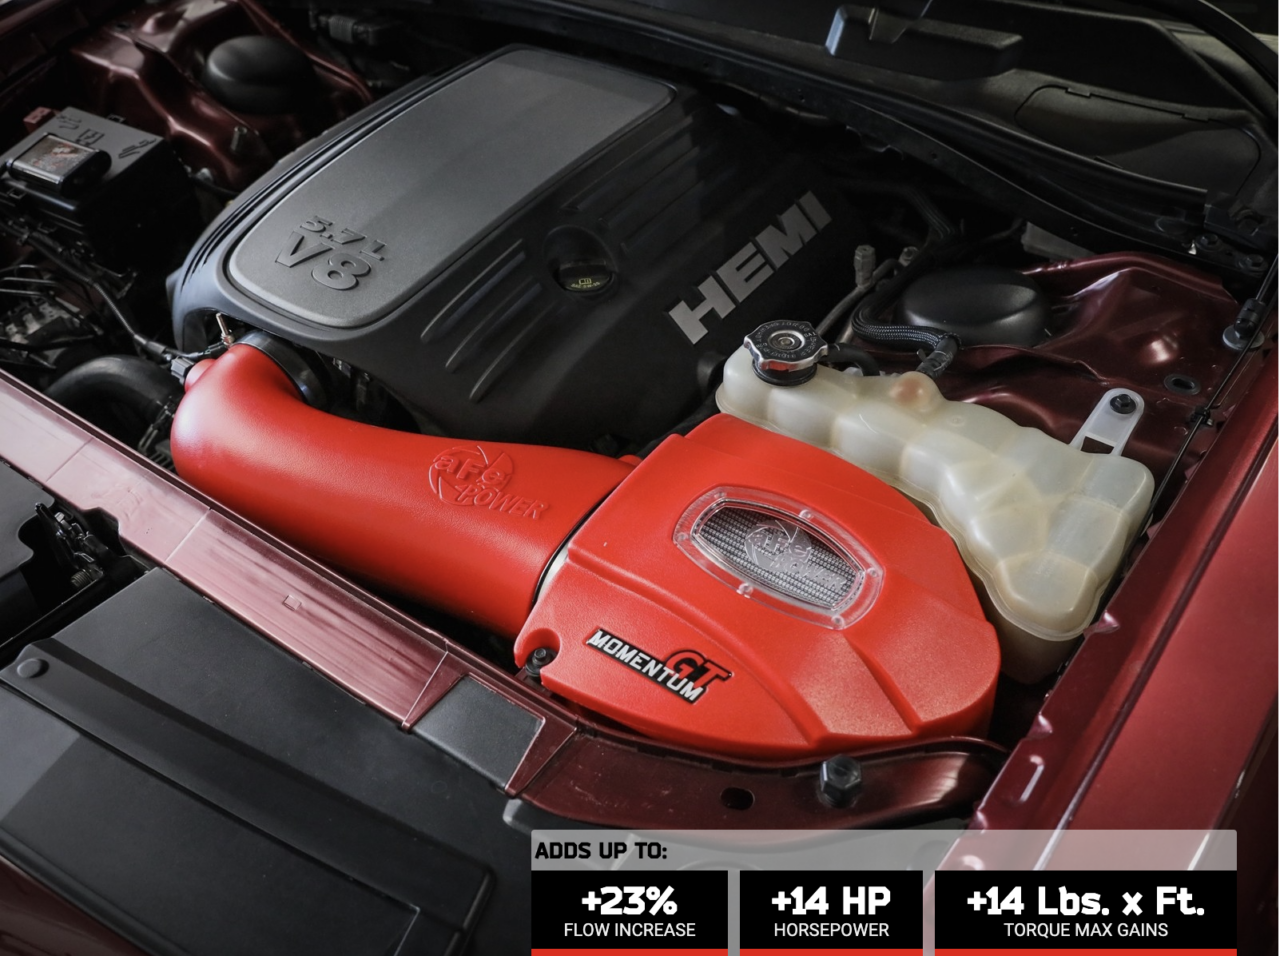 Aftermarket US-made Bright Red Momentum GT AFE cold air intake with red industrial plastic airbox and long red industrial plastic with grey filter and clear sightglass window installed in engine under hood on 2014 Dodge Charger V8 5.7L<br />
